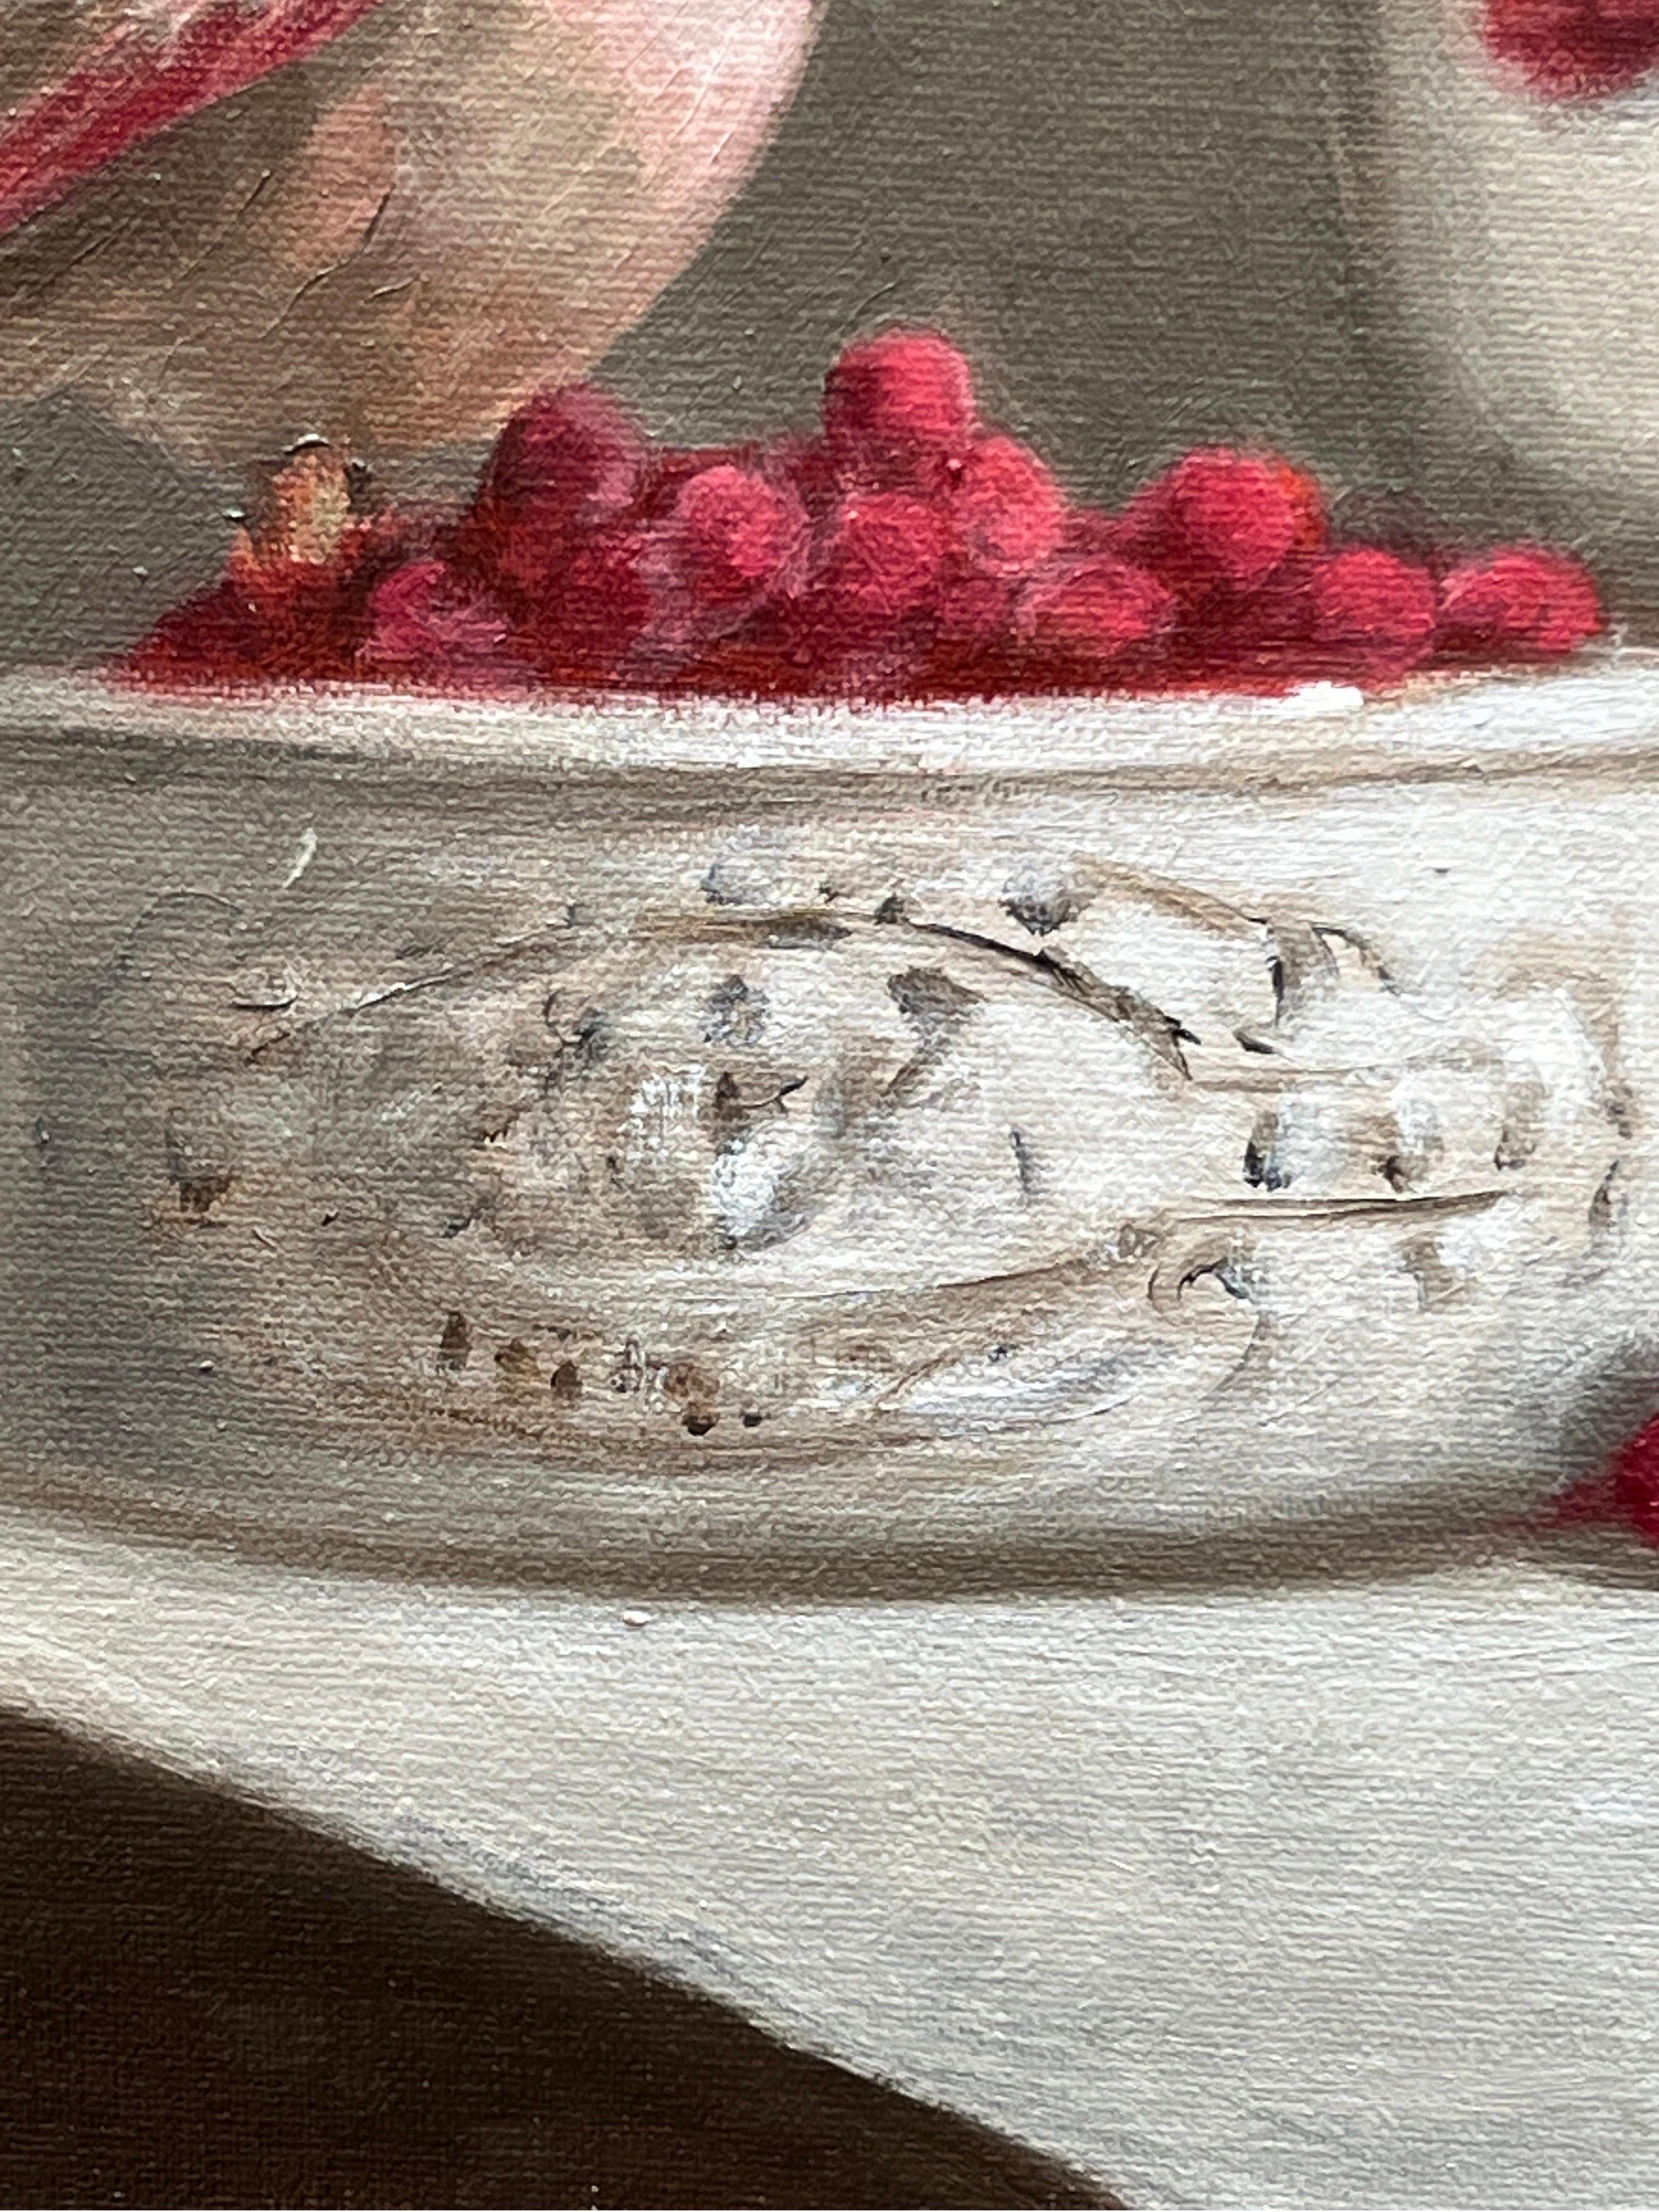 This piece is an original oil painting on linen panel. In it, a house finch sits on a ceramic dish of red berries next to a bouquet of flowers. 

GC Williams has a degree in art history which gave her an understanding of, and appreciation for, not